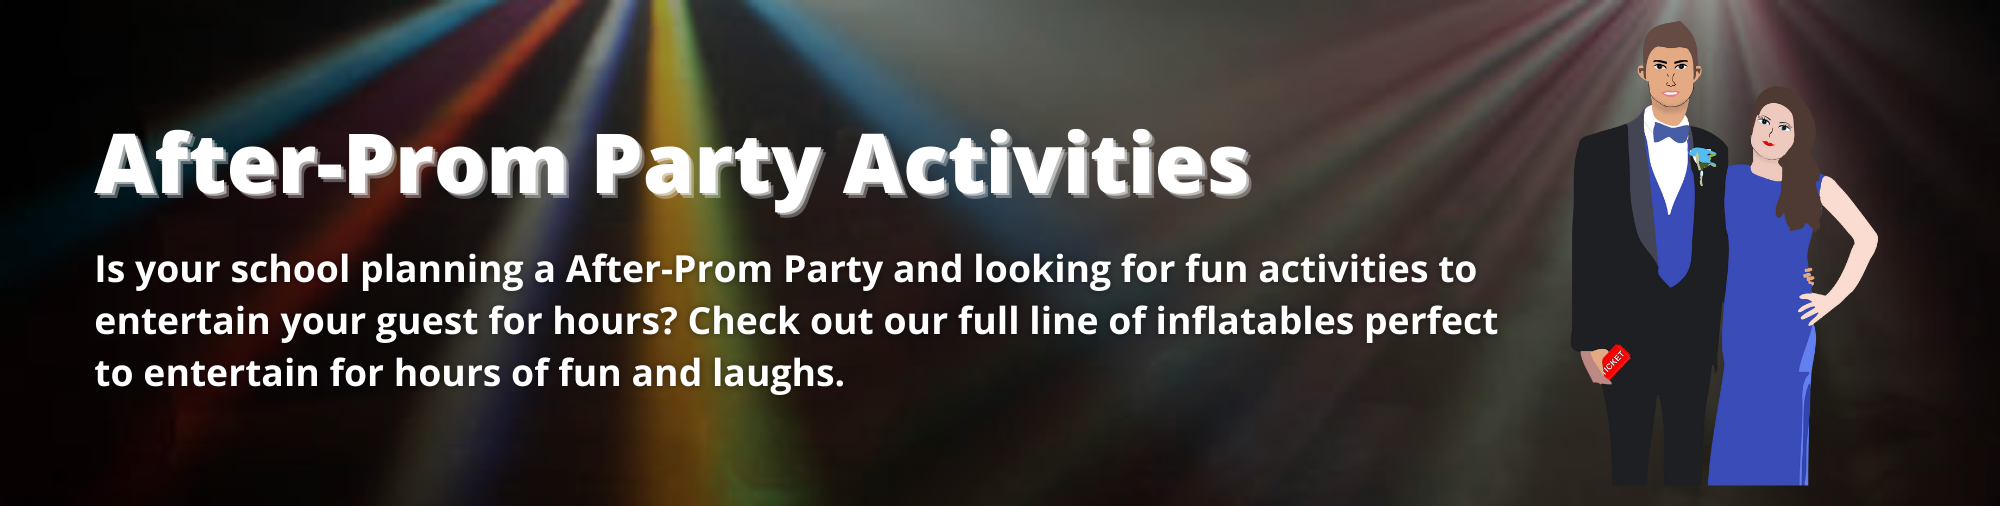 Is your school planning a After-Prom Party and looking for fun activities to entertain your guest for hours? Check out our full line of inflatables perfect to entertain for hours of fun and laughs. 